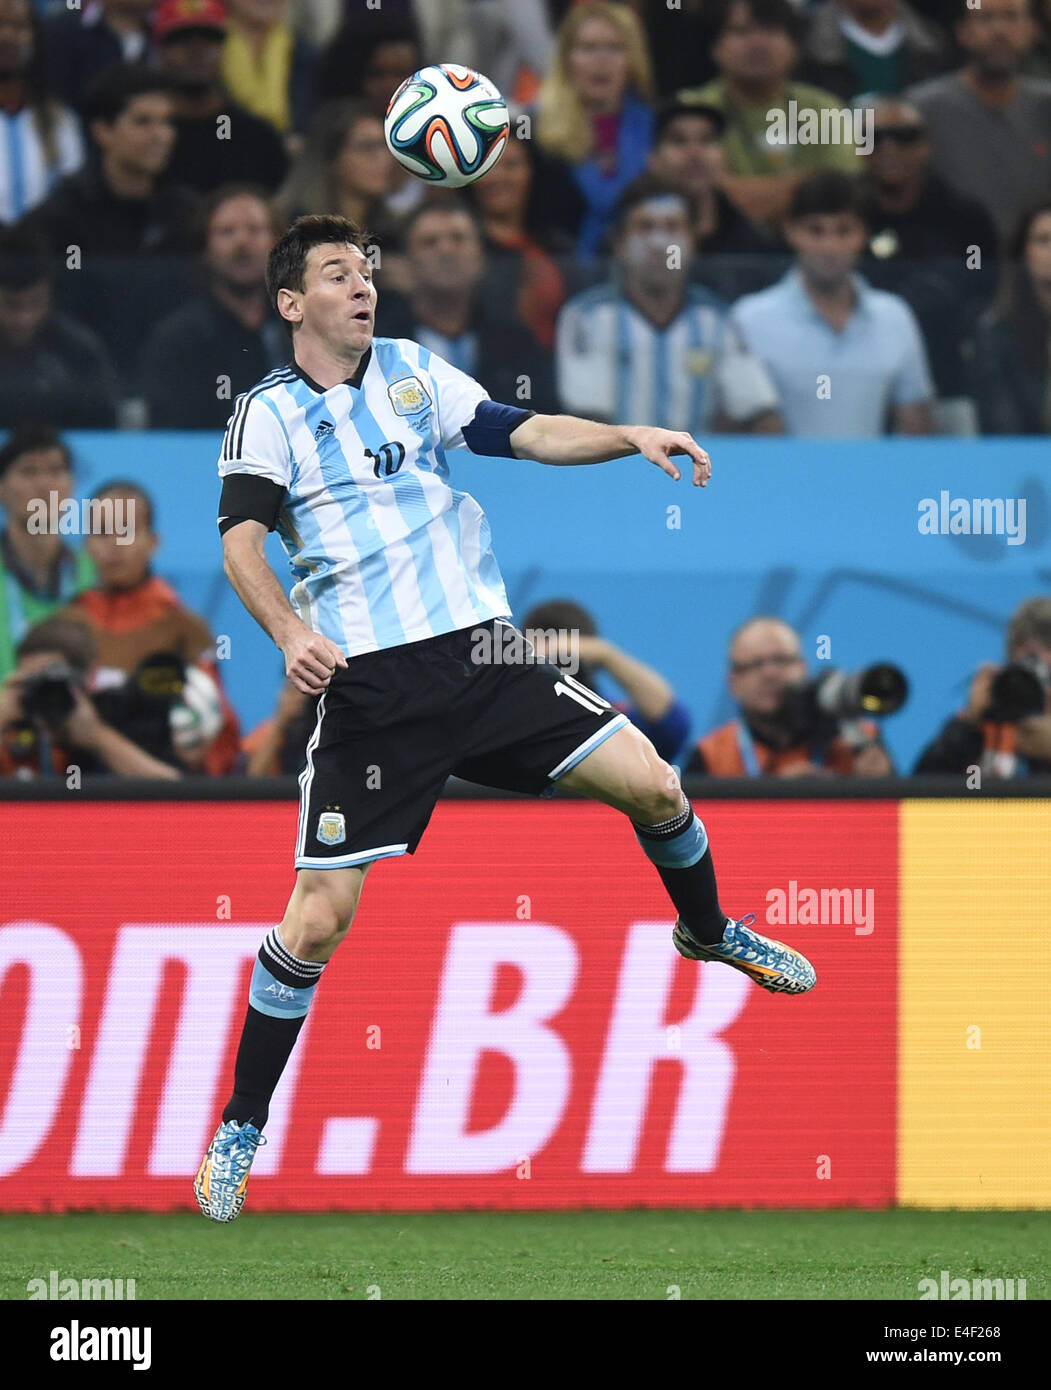 Sao Paulo, Brazil. 09th July, 2014. Lionel Messi of Argentina in action during the FIFA World Cup 2014 semi-final soccer match between the Netherlands and Argentina at the Arena Corinthians in Sao Paulo, Brazil, 09 July 2014. Photo: Marius Becker/dpa/Alamy Live News Stock Photo